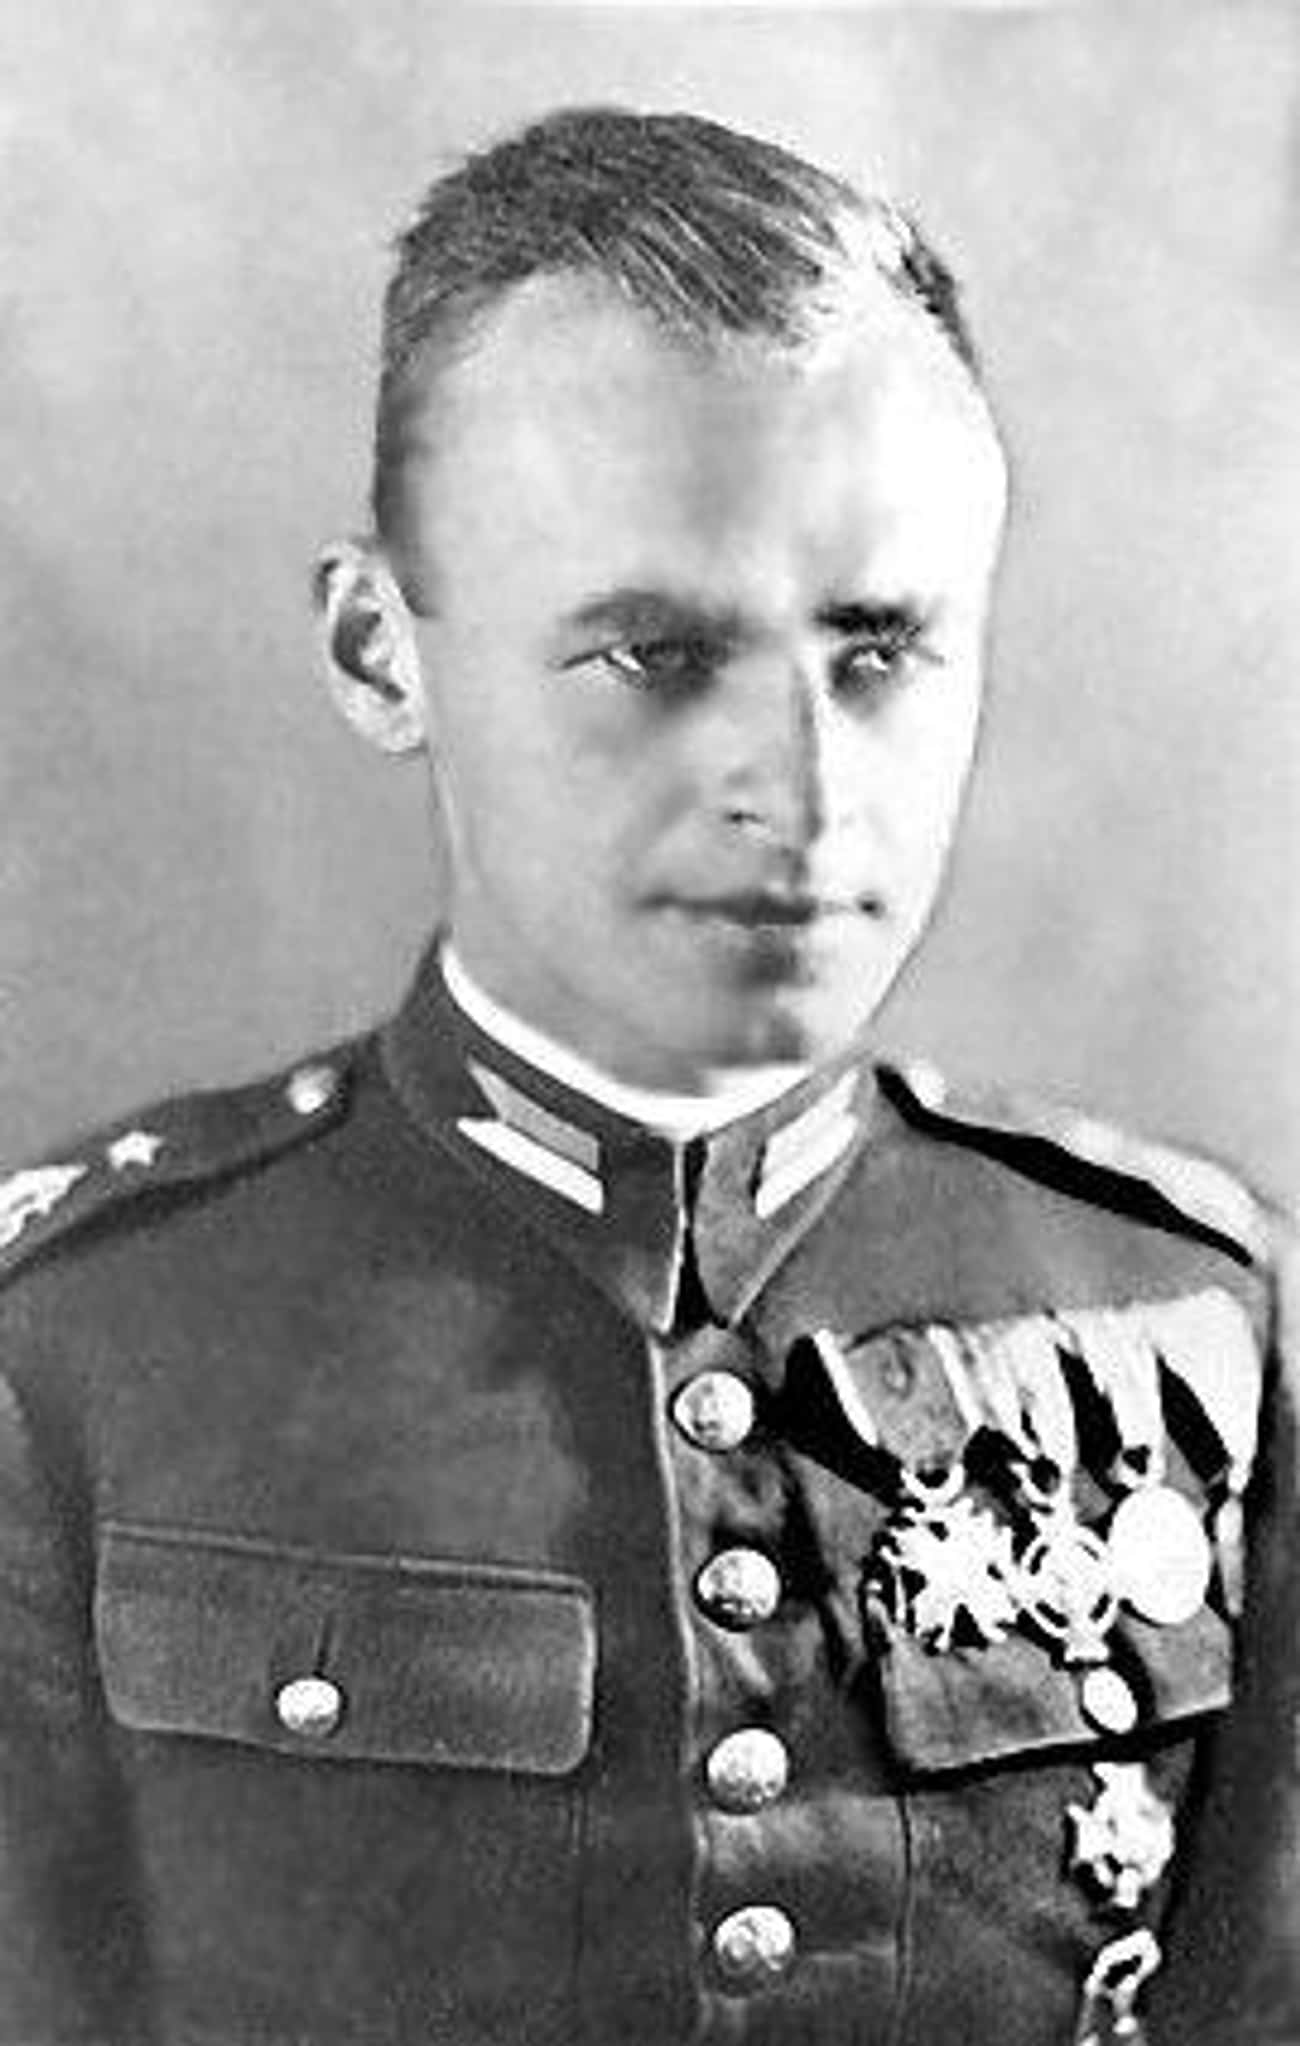 Captain Witold Pilecki Volunteered To Go To Auschwitz Undercover To Expose Nazi Crimes